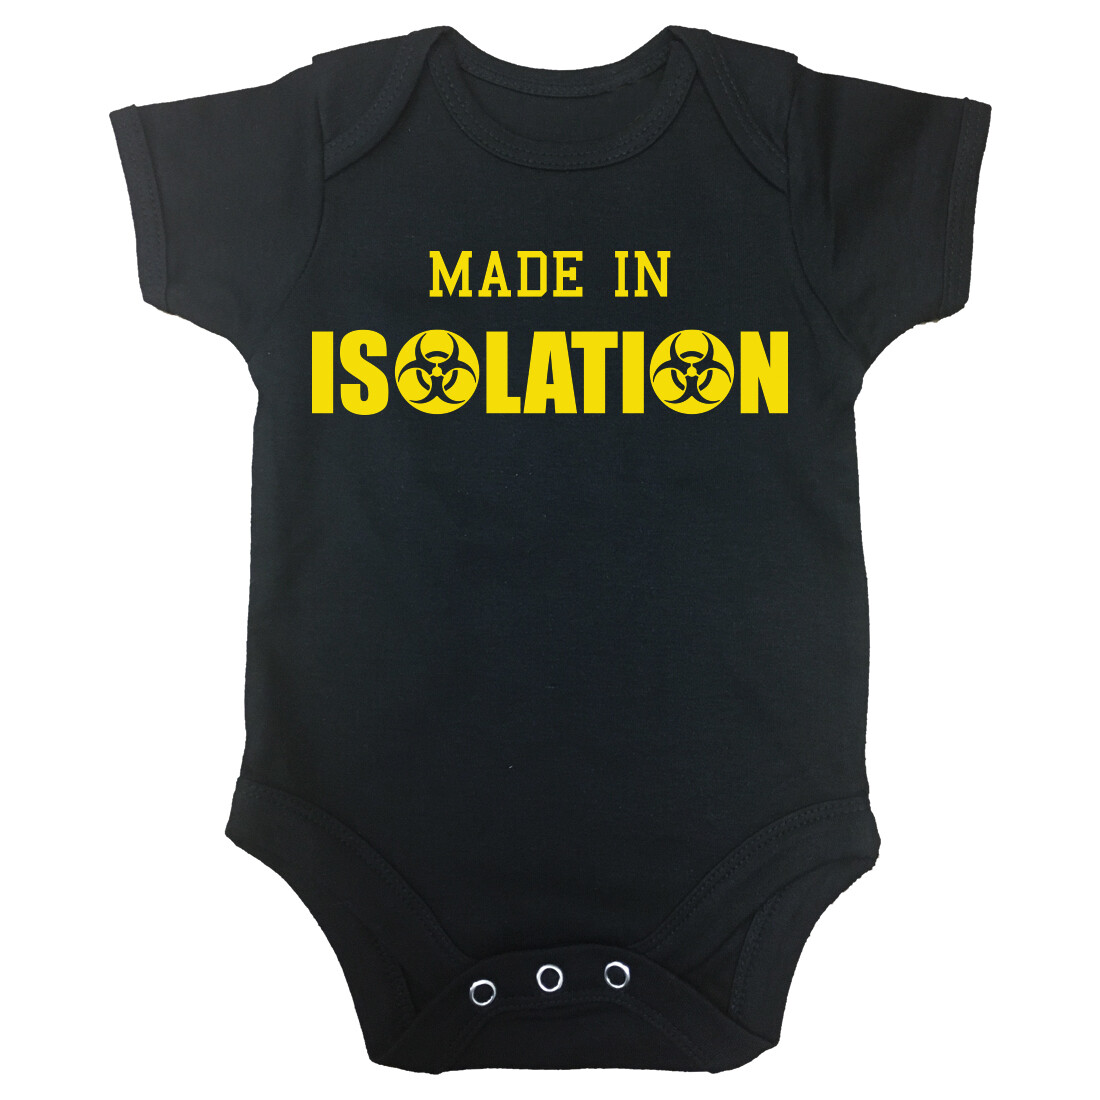 'Made in Isolation' Baby Grow